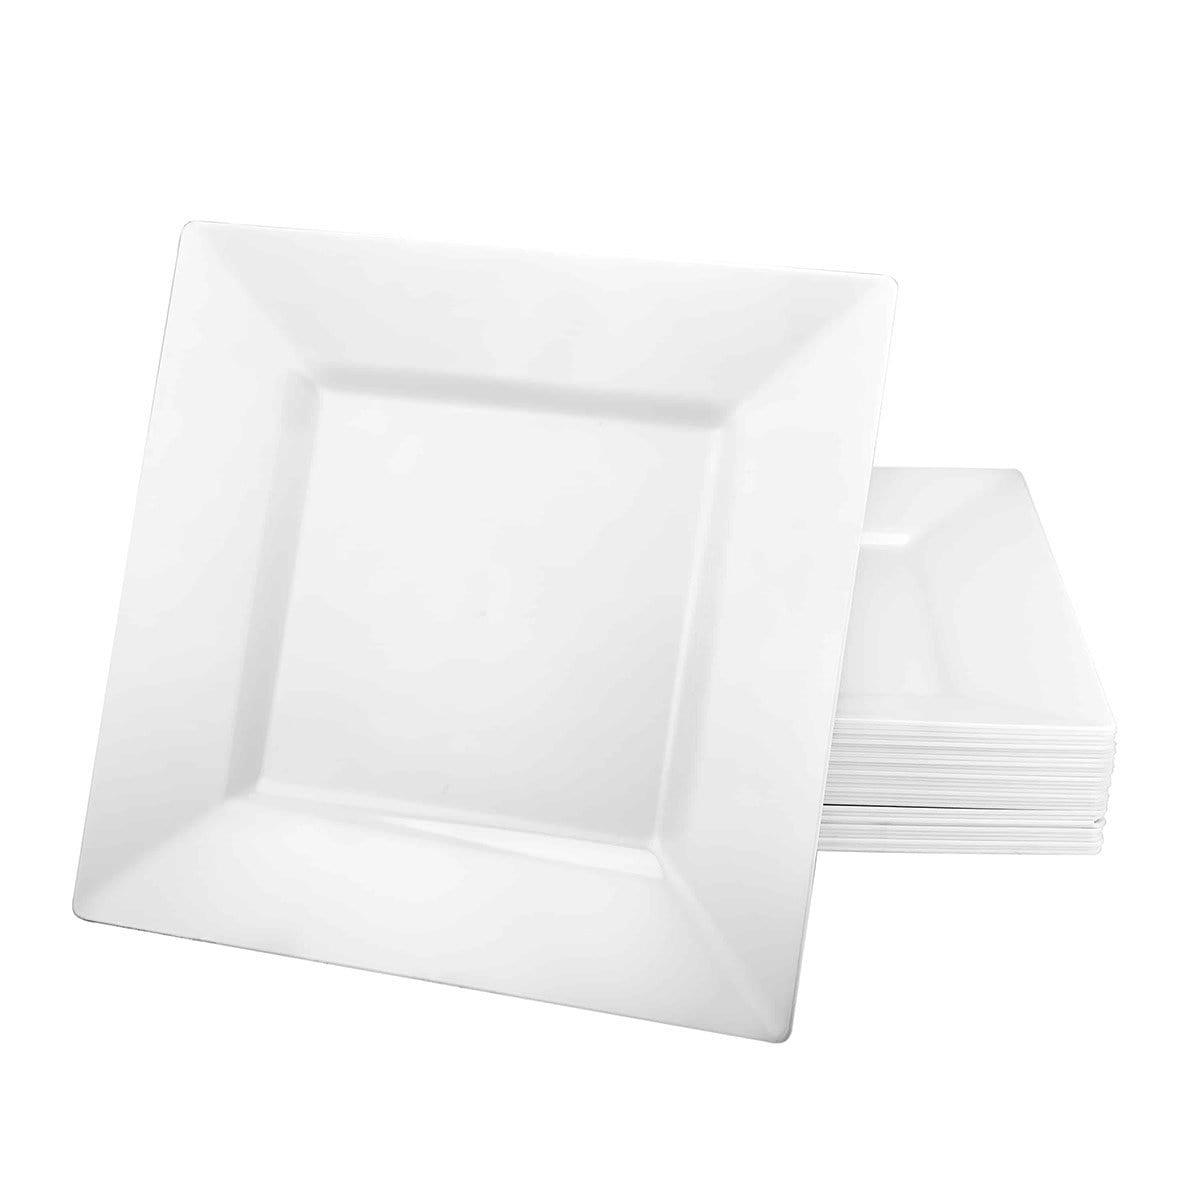 Buy plasticware Square Plate 10In., White, 10 Count sold at Party Expert